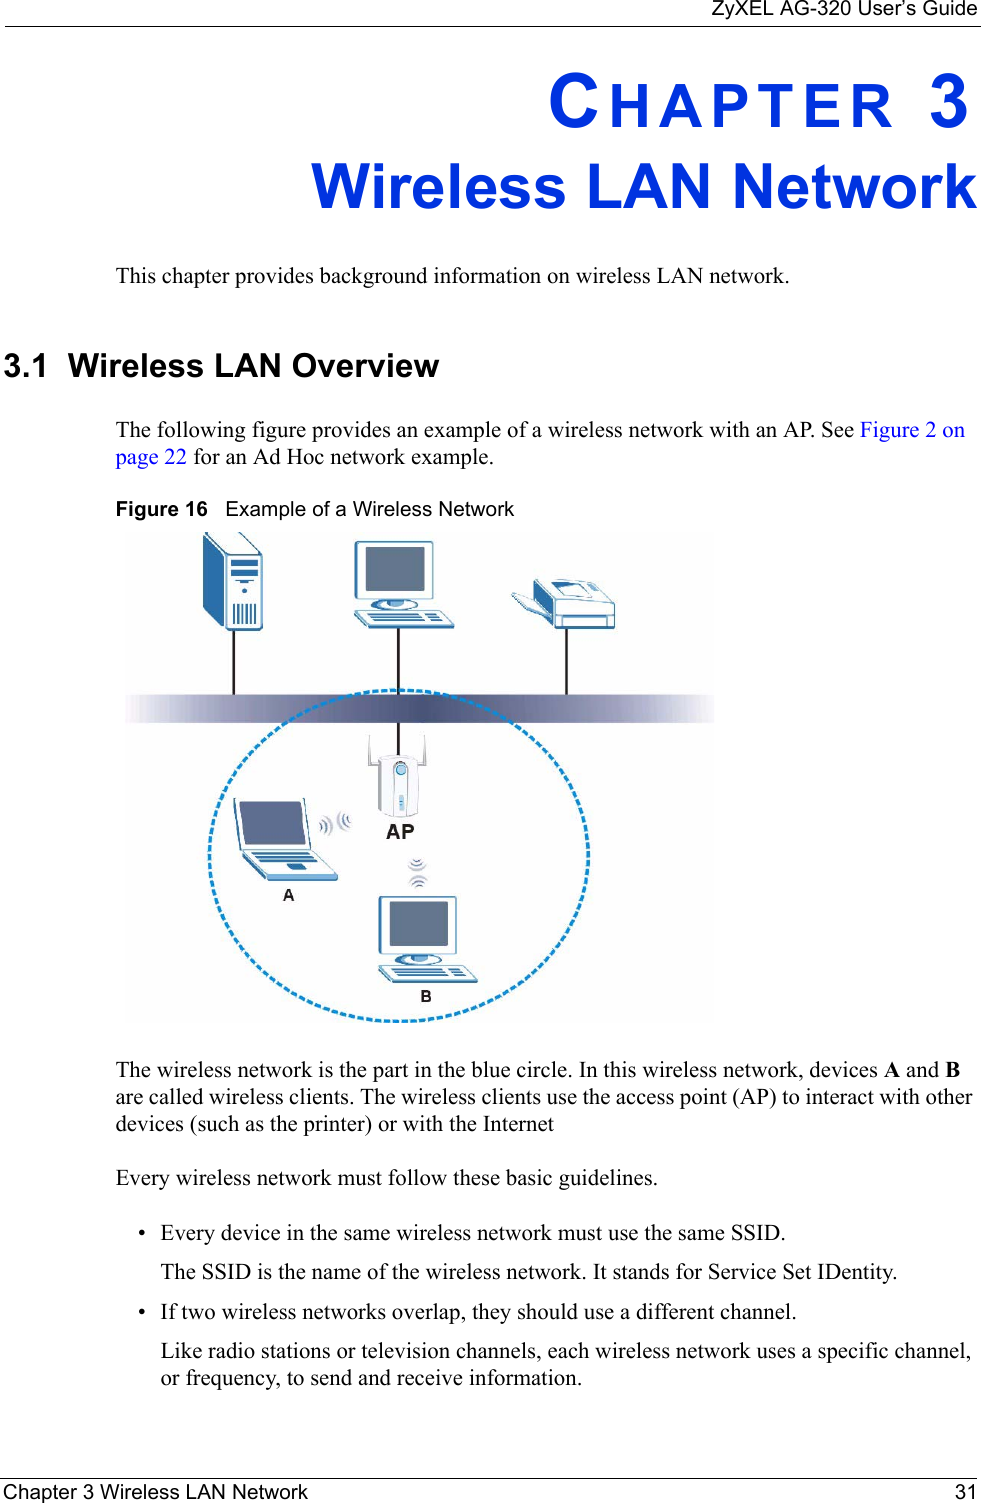 ZyXEL AG-320 User’s GuideChapter 3 Wireless LAN Network 31CHAPTER 3Wireless LAN NetworkThis chapter provides background information on wireless LAN network.3.1  Wireless LAN Overview The following figure provides an example of a wireless network with an AP. See Figure 2 on page 22 for an Ad Hoc network example.Figure 16   Example of a Wireless NetworkThe wireless network is the part in the blue circle. In this wireless network, devices A and B are called wireless clients. The wireless clients use the access point (AP) to interact with other devices (such as the printer) or with the InternetEvery wireless network must follow these basic guidelines.• Every device in the same wireless network must use the same SSID.The SSID is the name of the wireless network. It stands for Service Set IDentity.• If two wireless networks overlap, they should use a different channel.Like radio stations or television channels, each wireless network uses a specific channel, or frequency, to send and receive information.